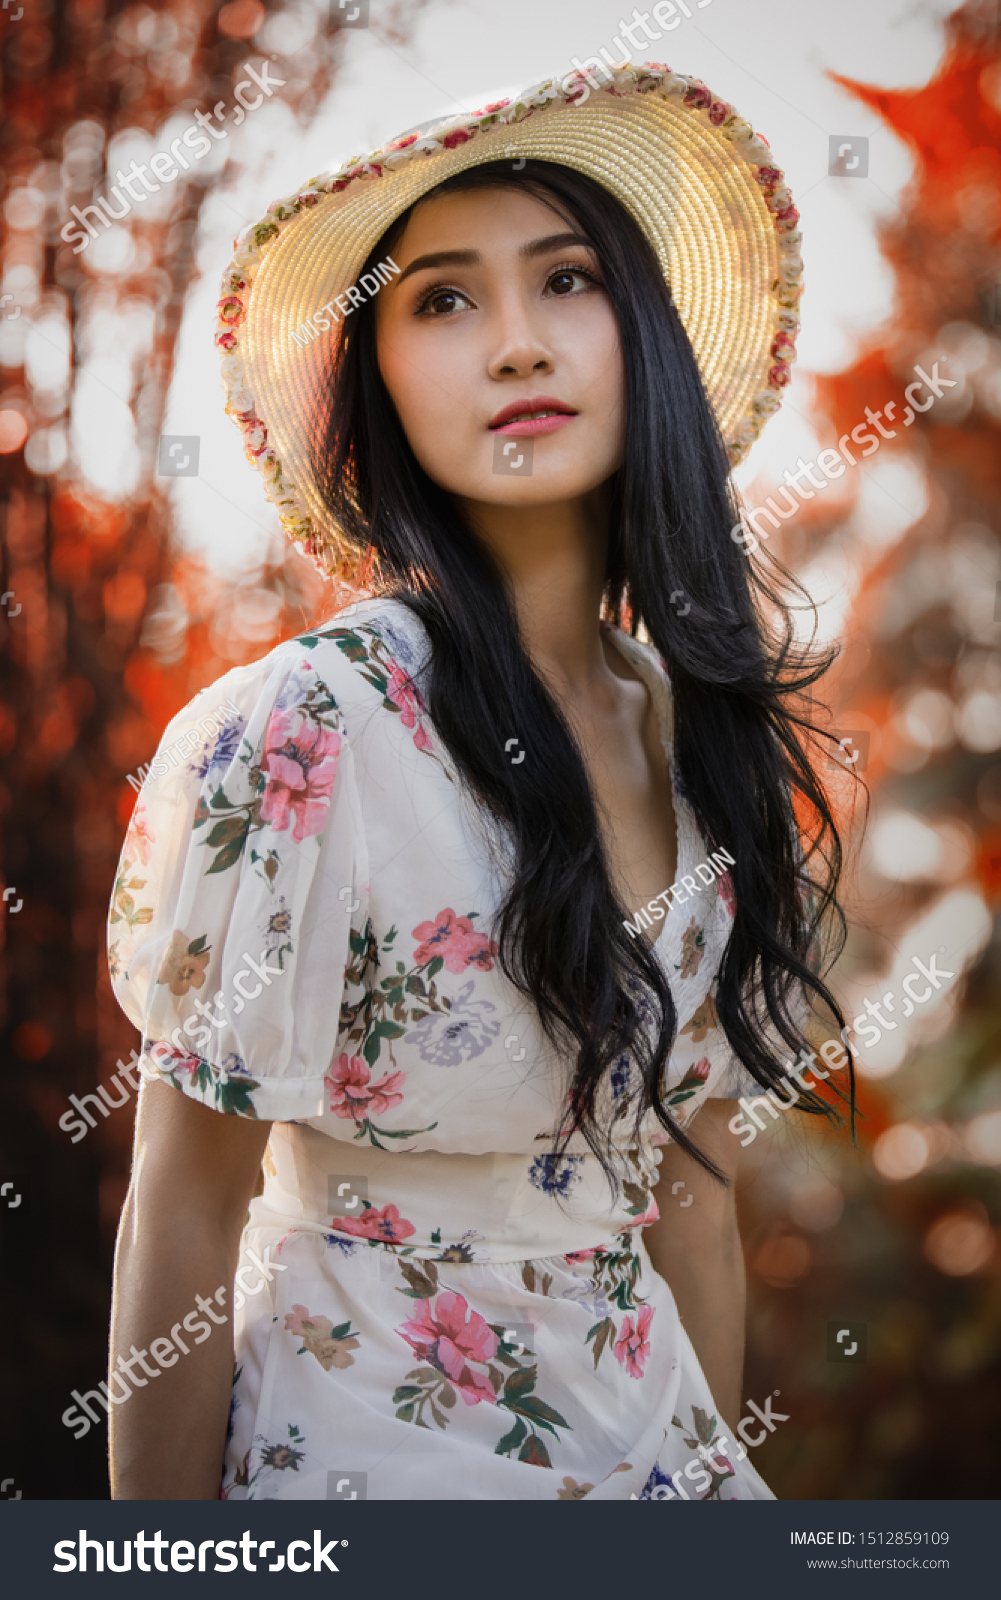 https://image.shutterstock.com/z/stock-photo-life-portrait-thai-model-of-a-beautiful-girl-in-a-vintage-dress-and-hat-in-the-garden-and-light-1512859109.jpg